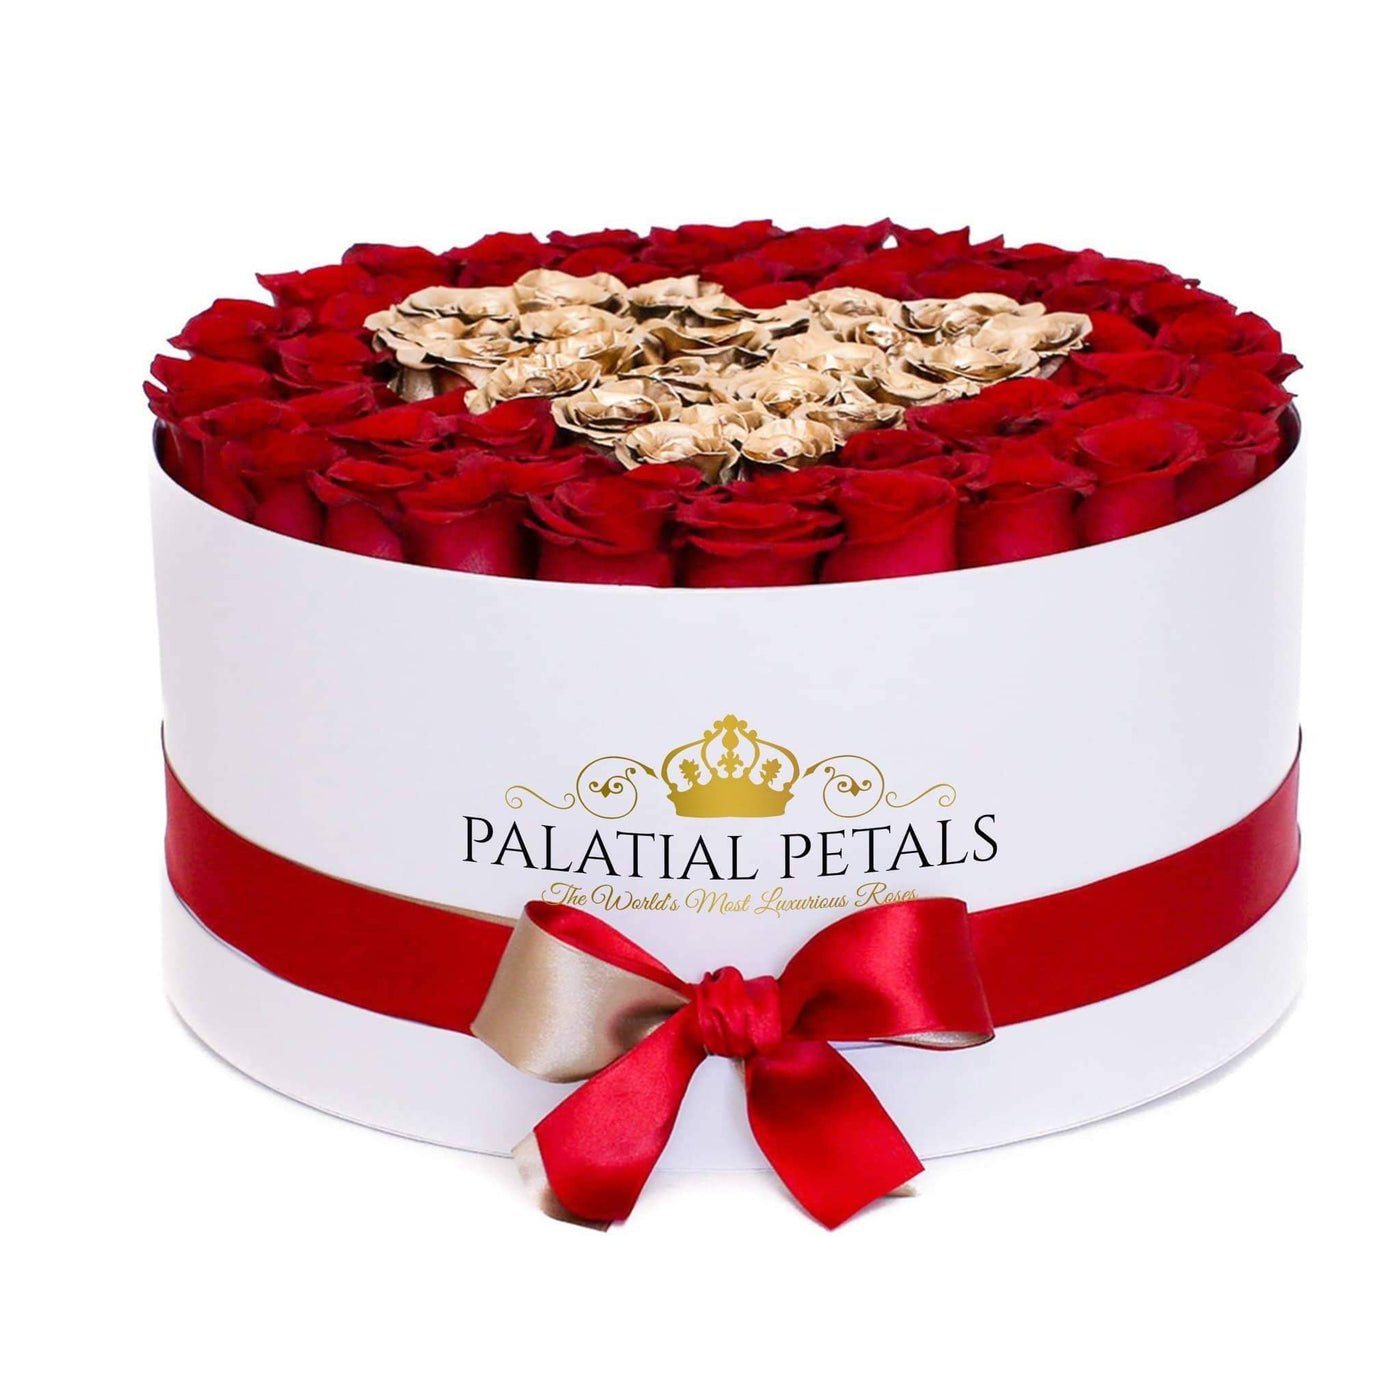 Red & 24k Gold Roses That Last A Year - Deluxe Rose Box